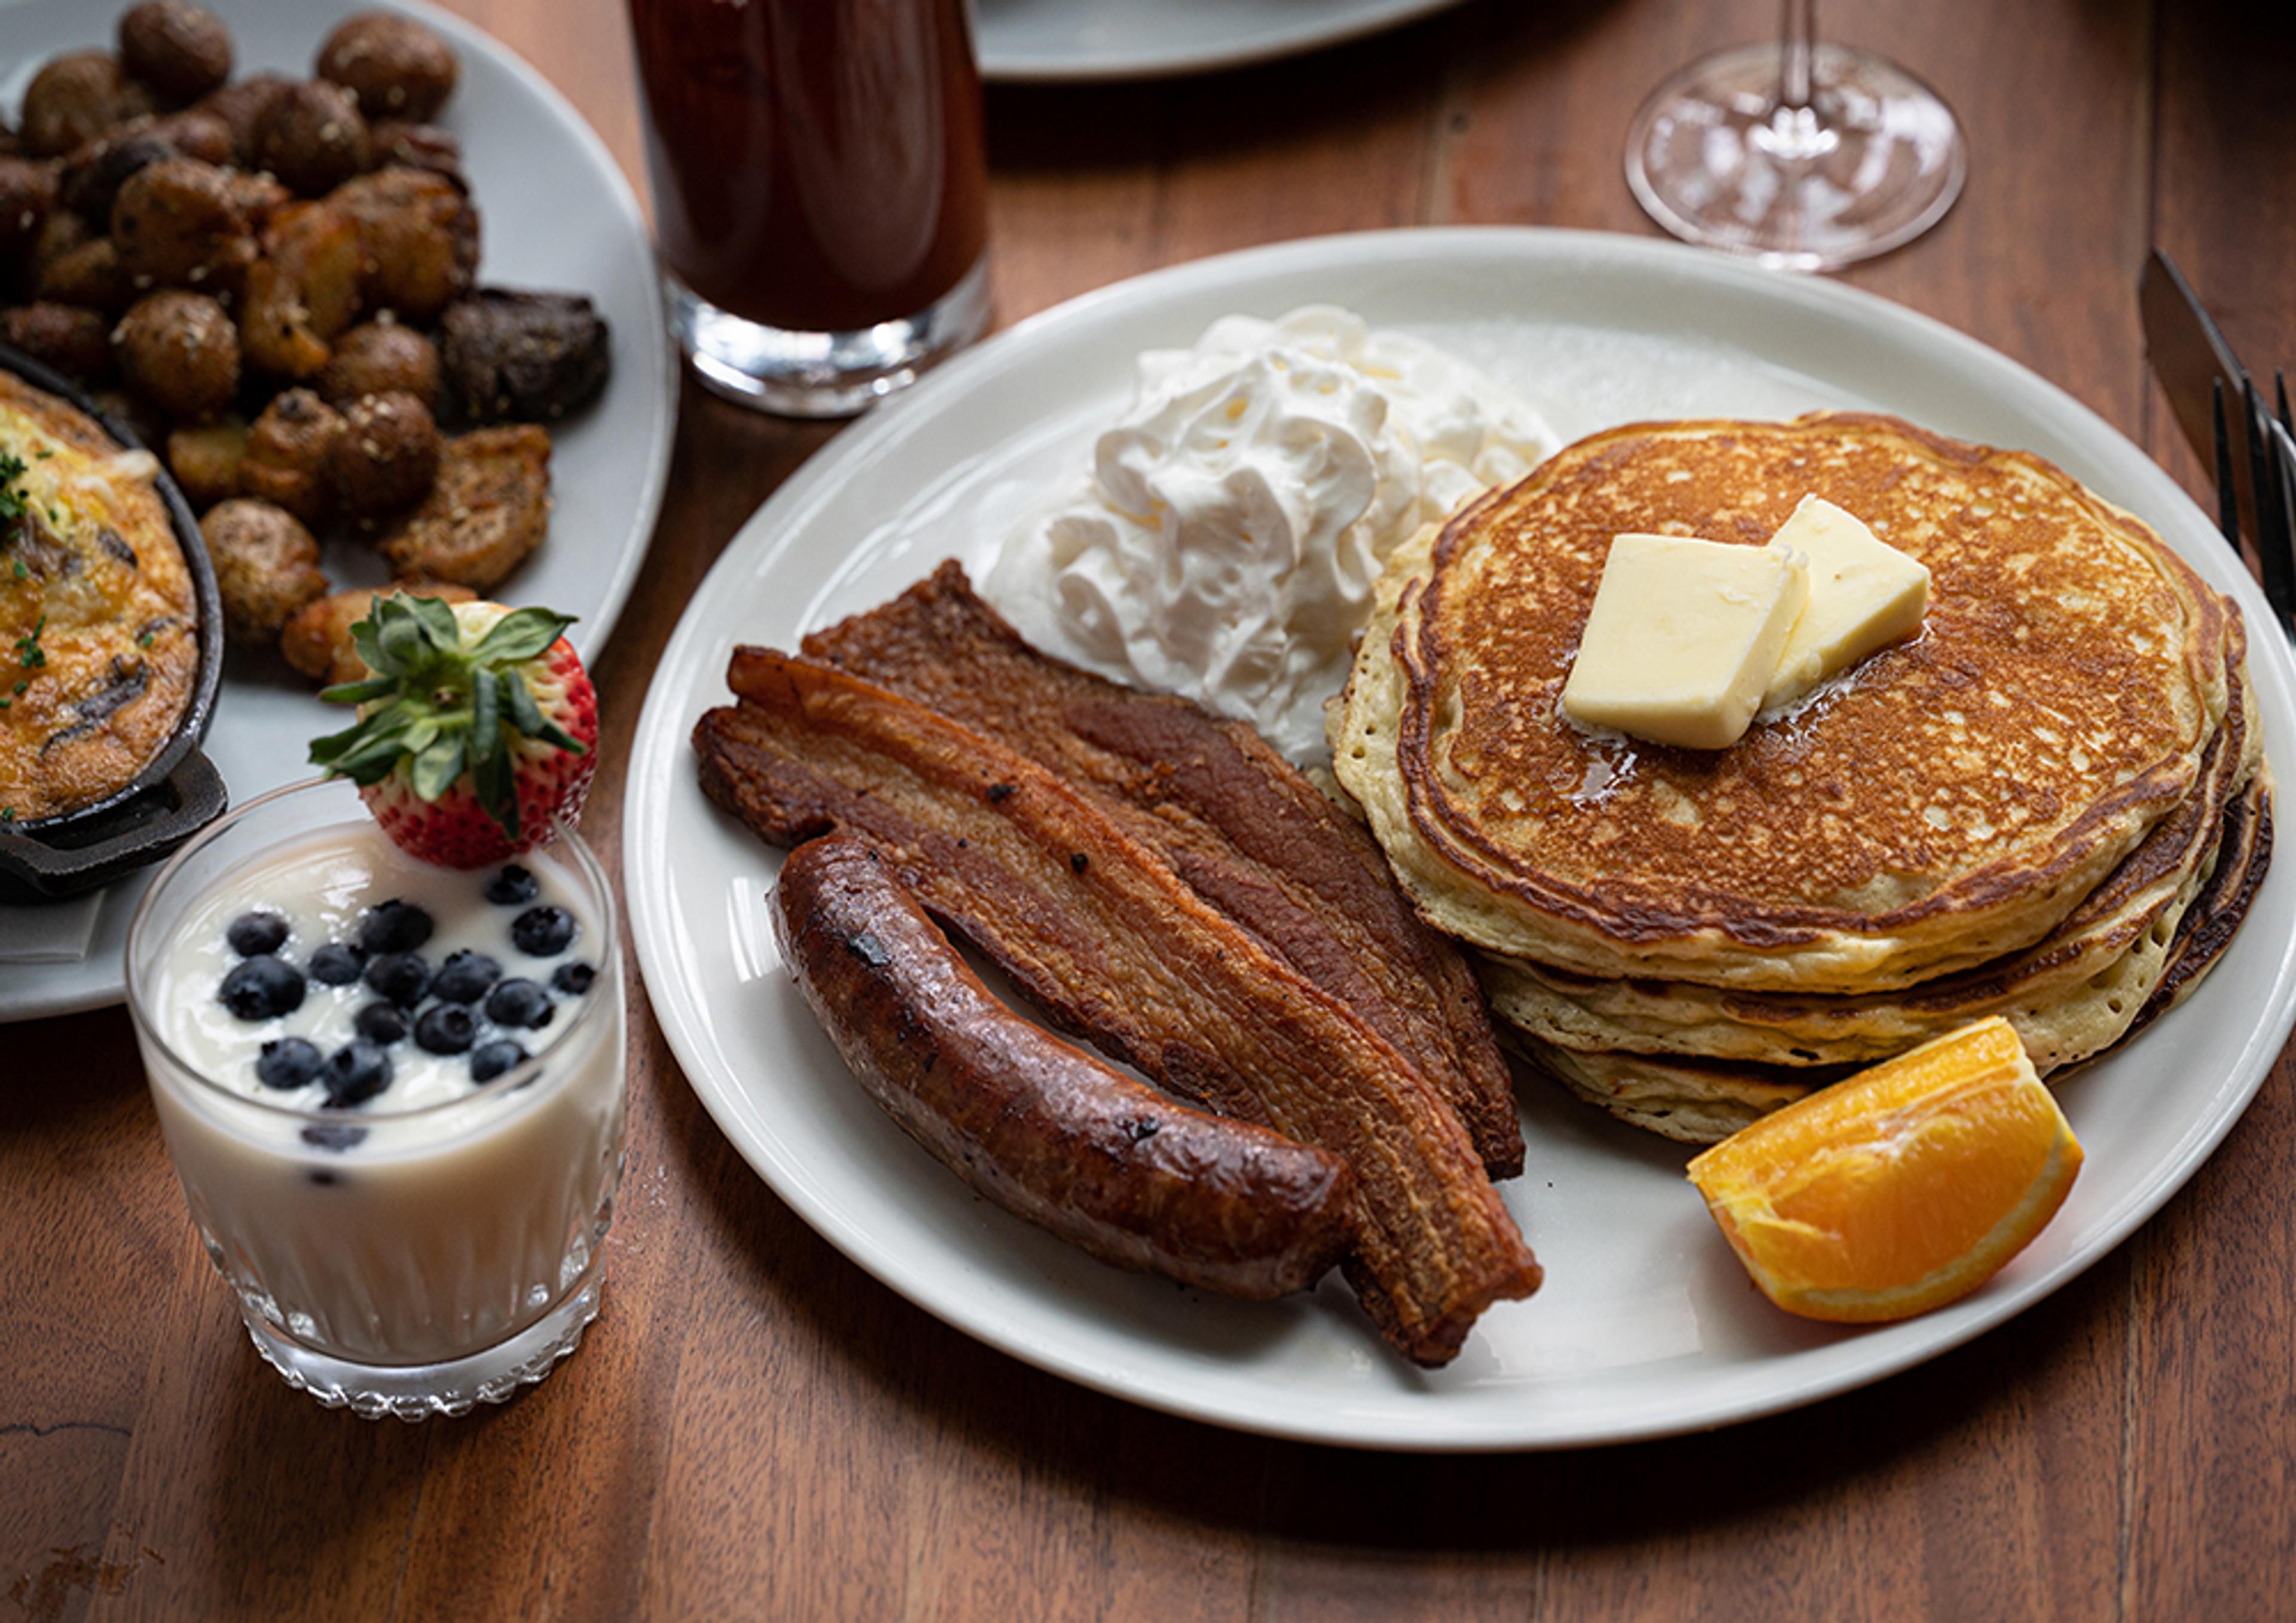 Brunch spread with pancakes, bacon, yogurt and Bloody Mary